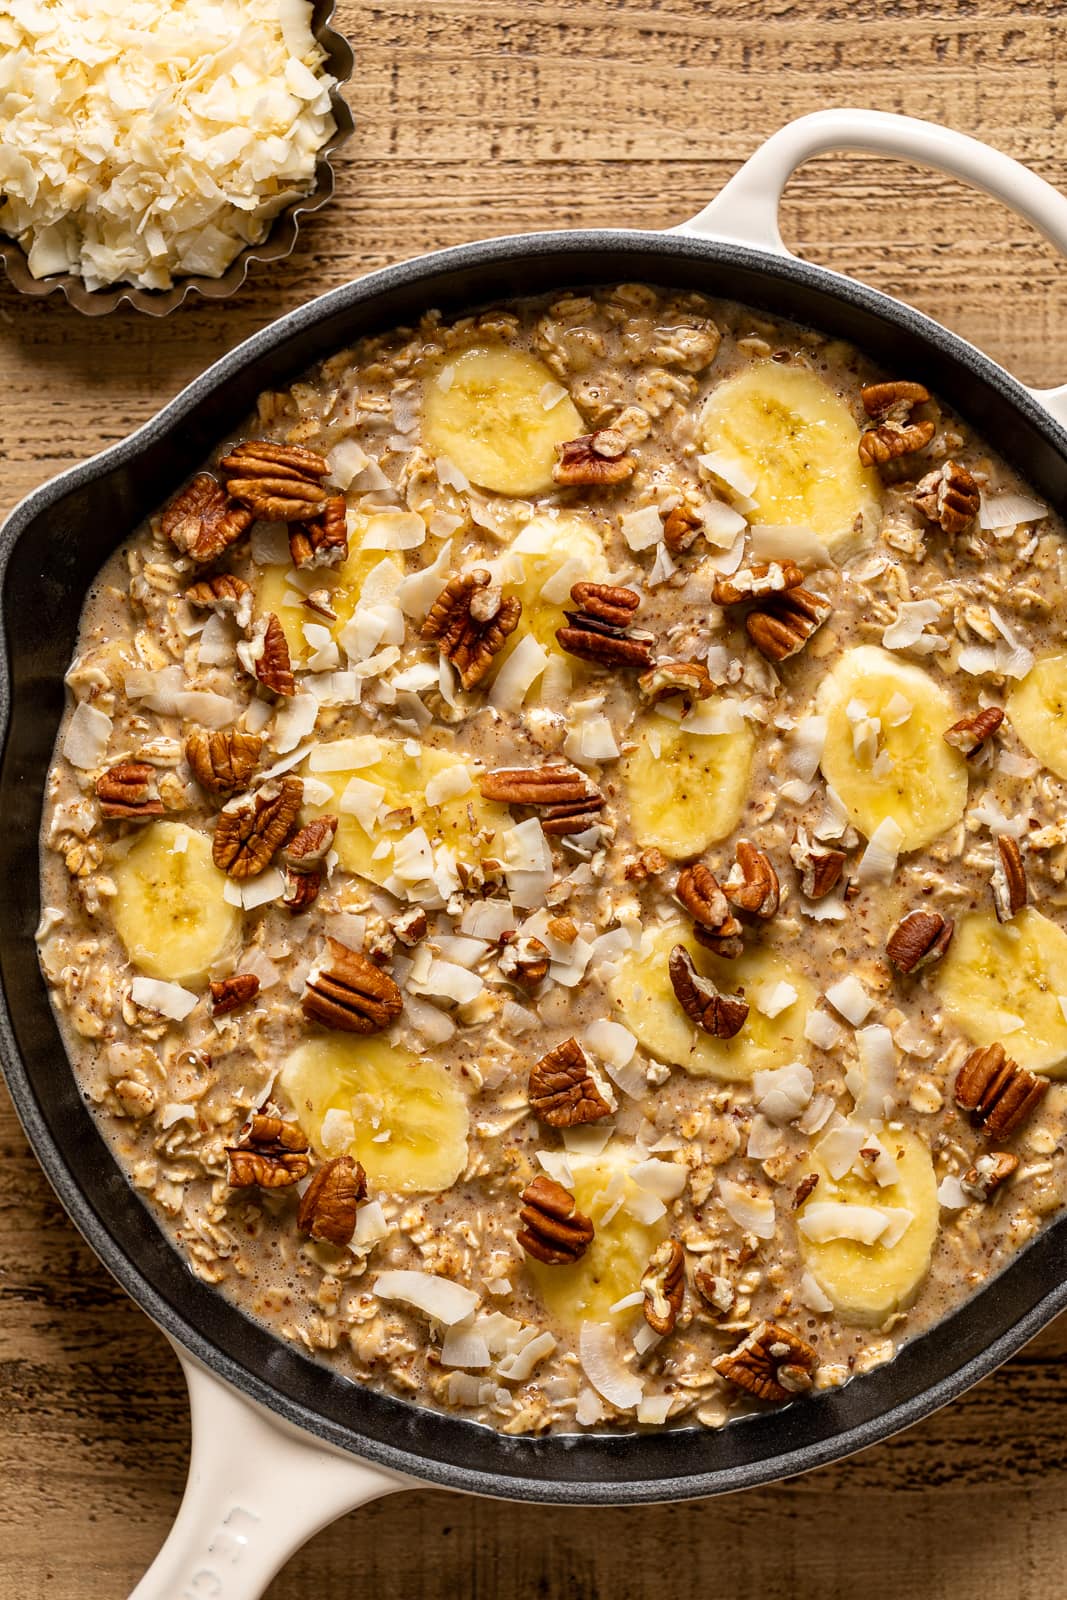 Pan of uncooked Jamaican-inspired Banana Bread Baked Oatmeal